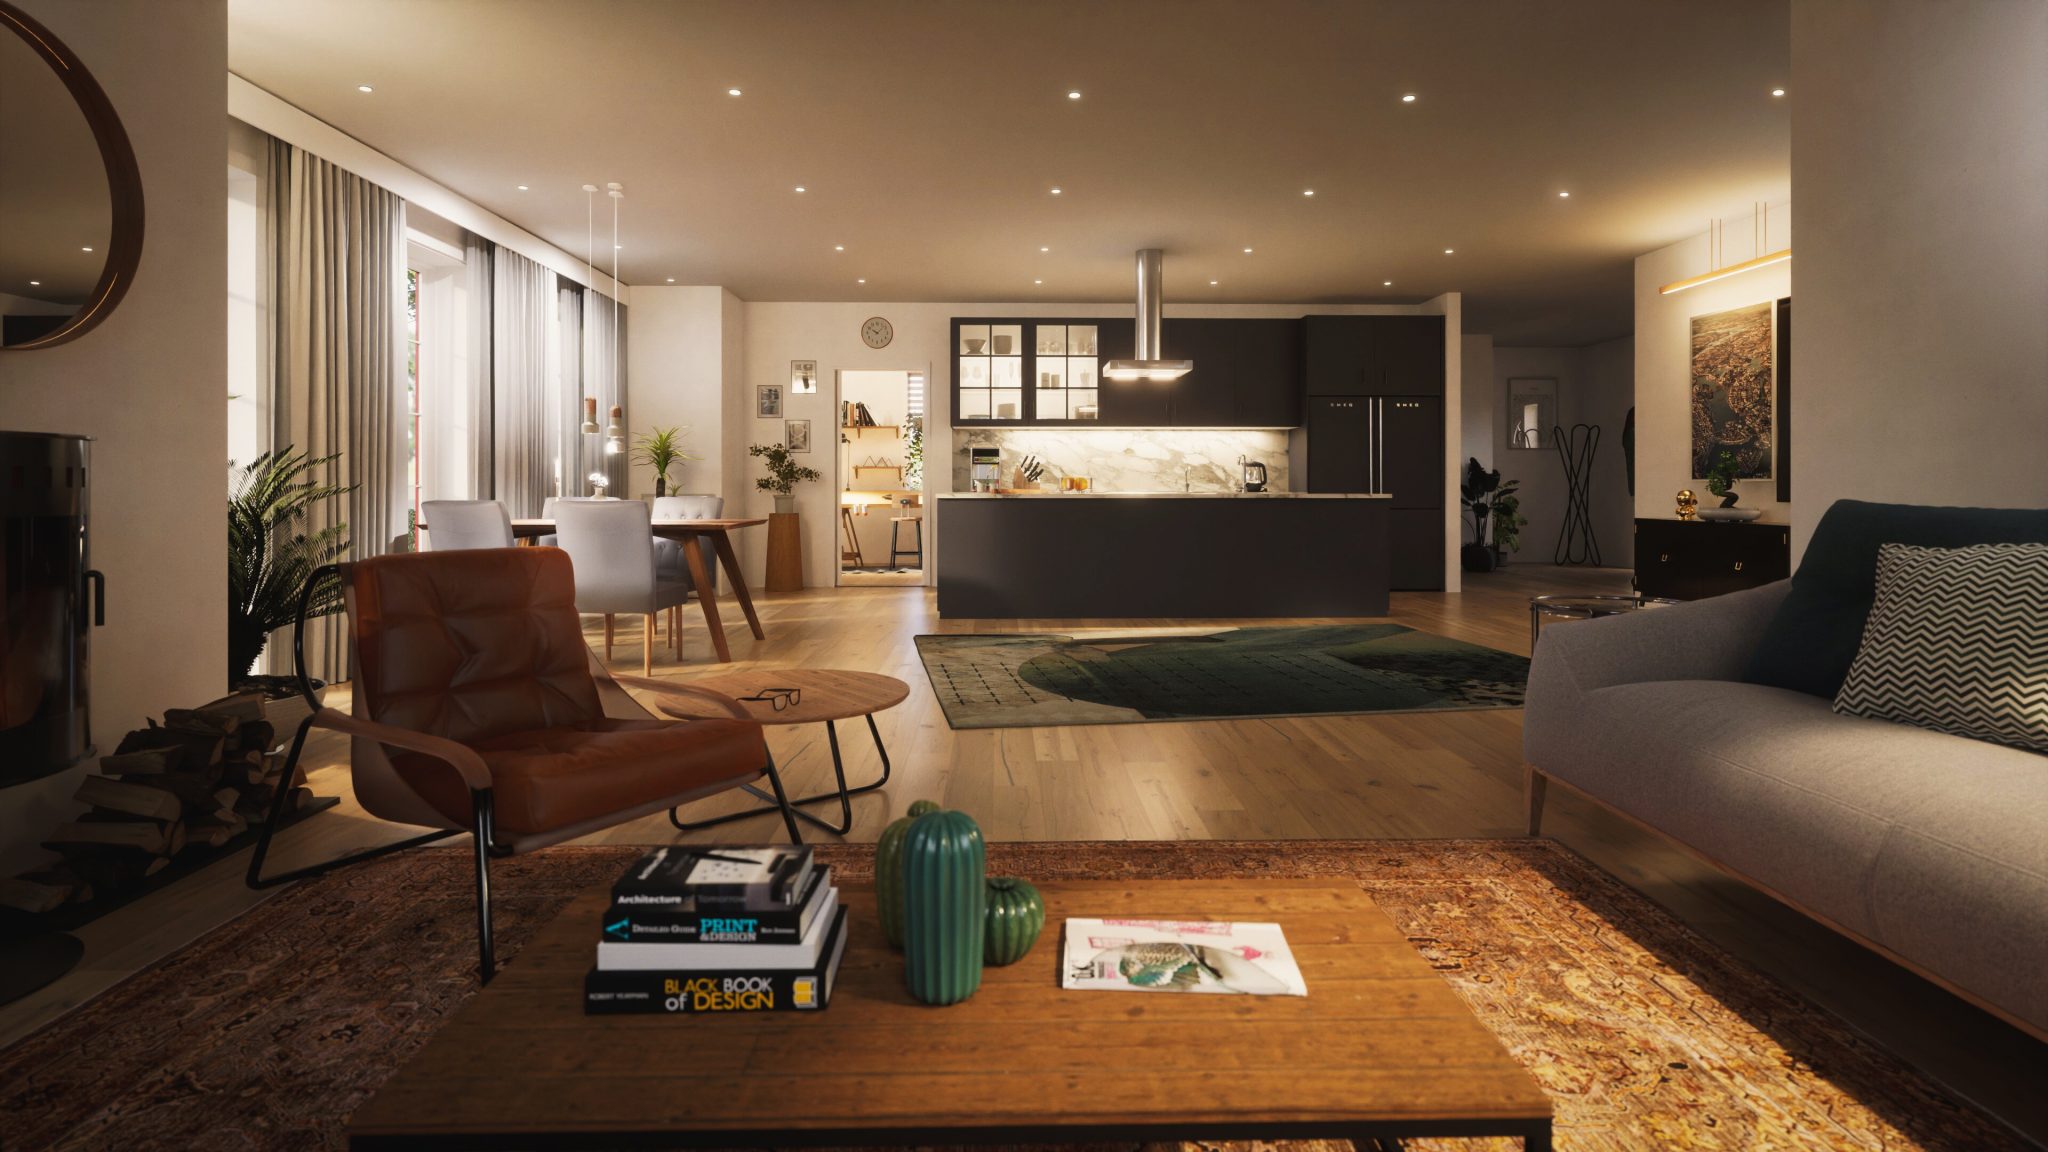 Stockholm architectural visualization - Trygge interior